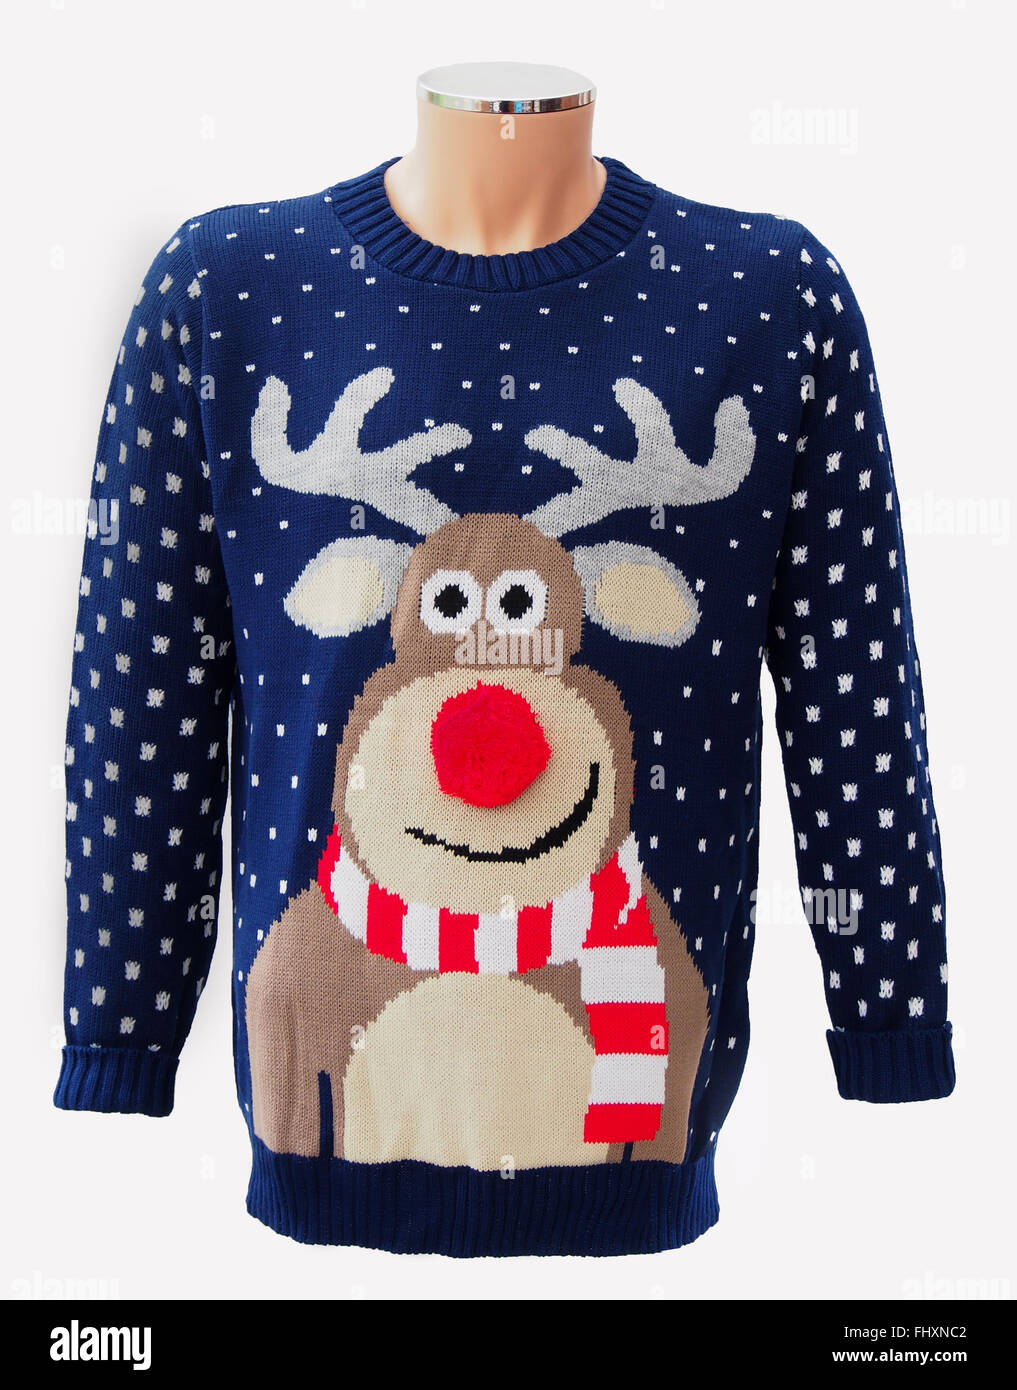 Blue knitted adults' Christmas jumper, featuring Rudolph the red nosed reindeer and snowflakes, isolated on a white background. Stock Photo